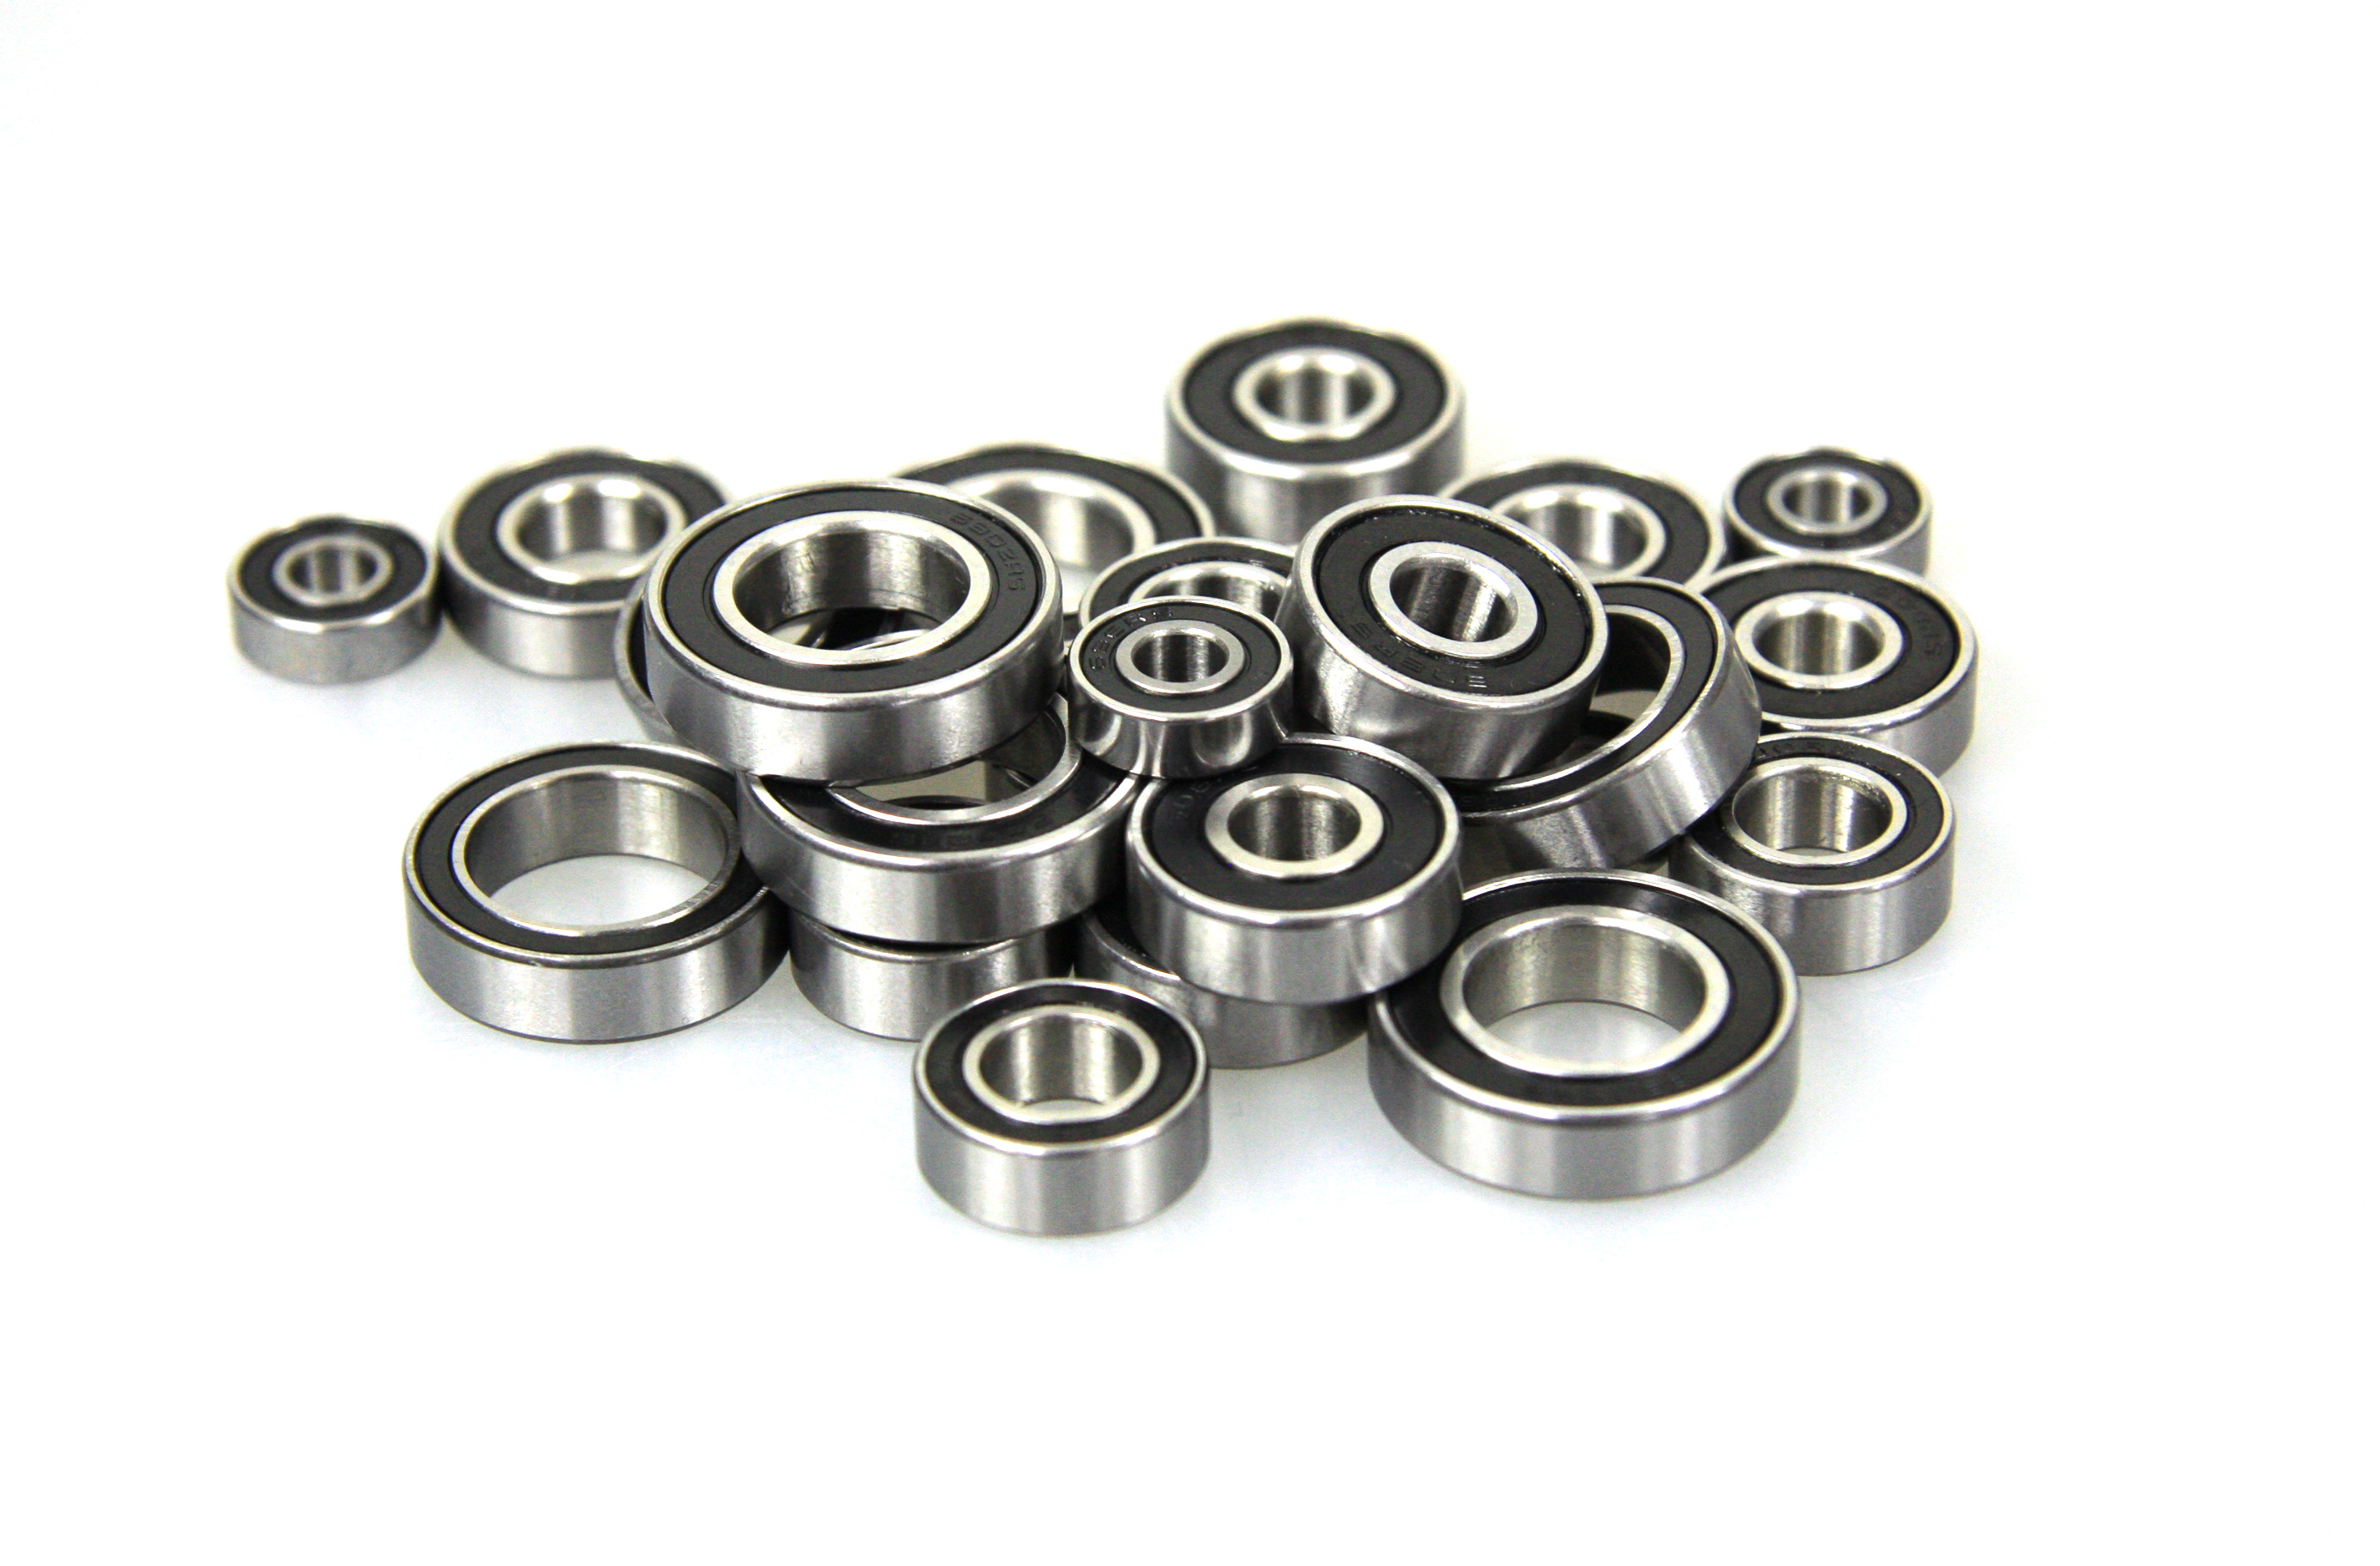 Ball bearings for FG, sealed, diverse sizes